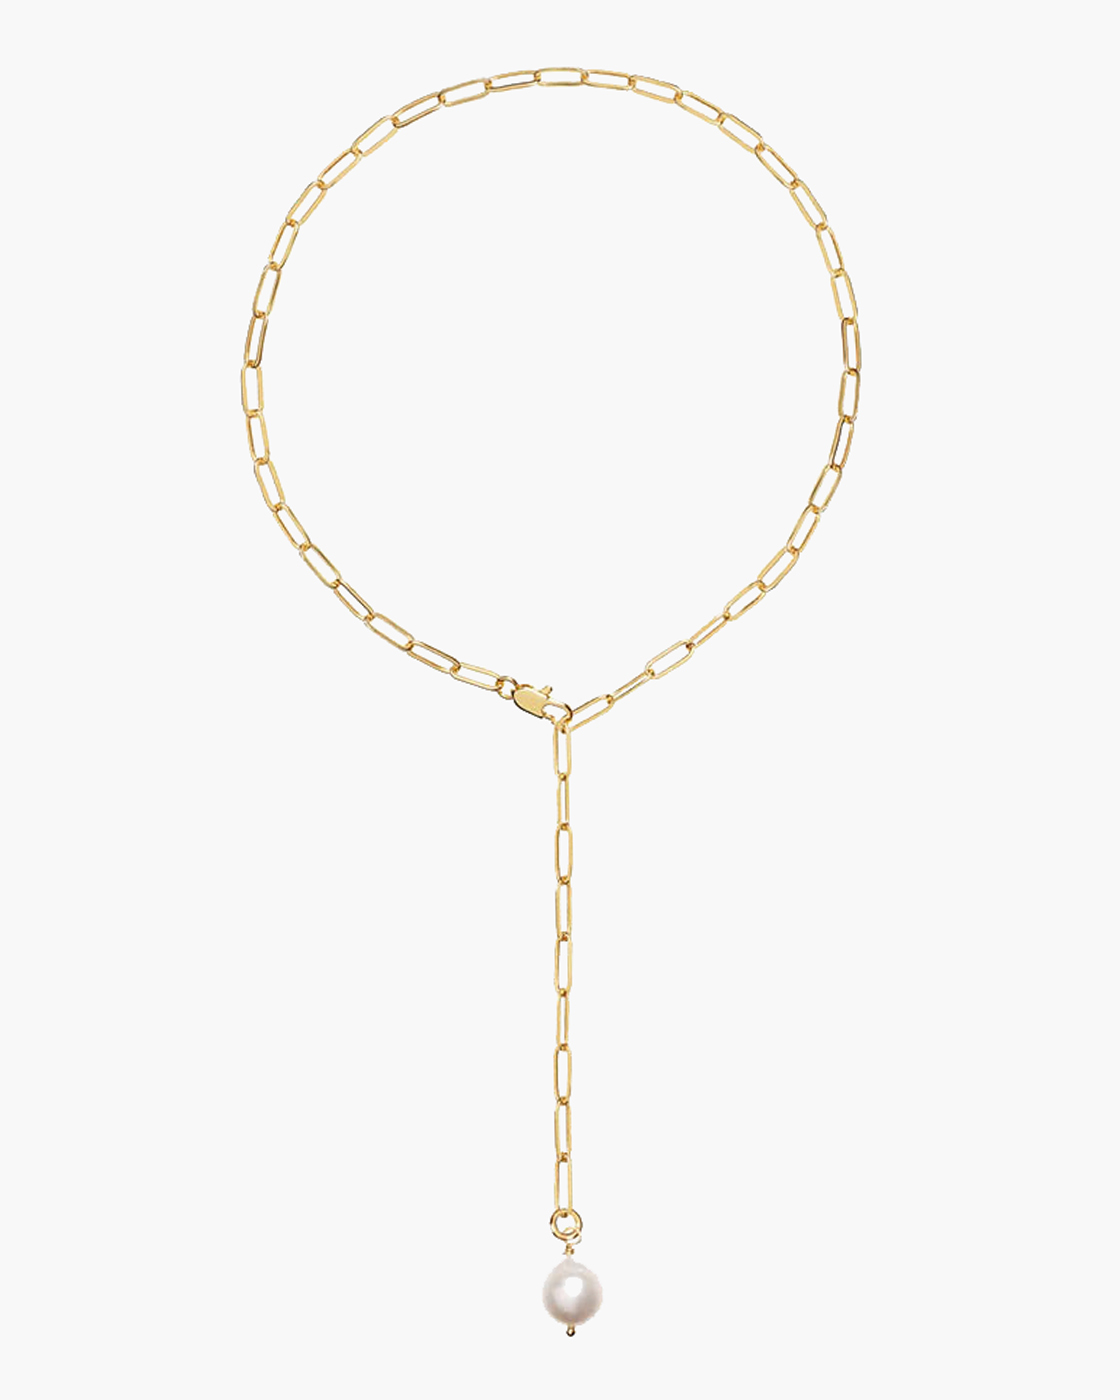 Tie Gold Chain Necklace with Pearl Pendant